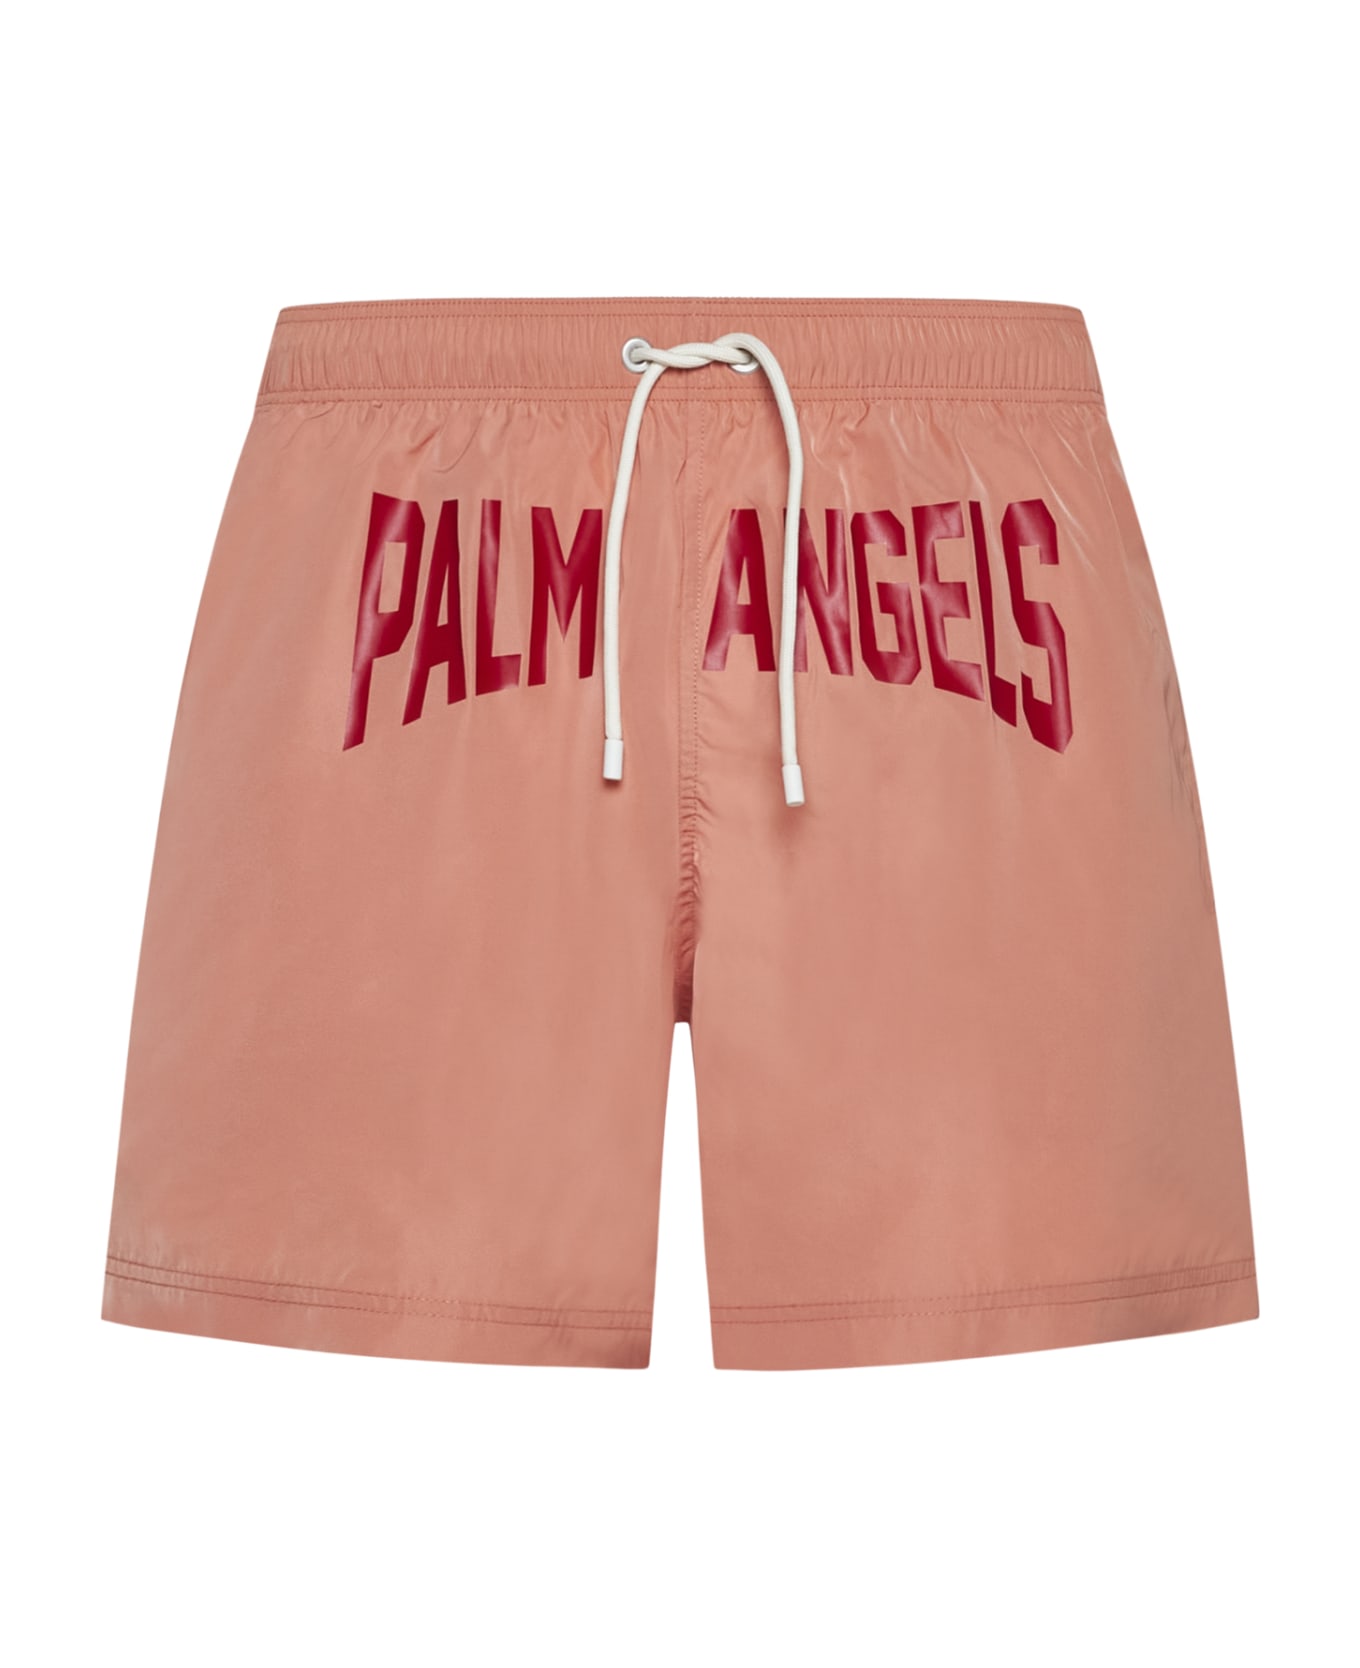 Palm Angels City Swimshort - Pink Red 水着